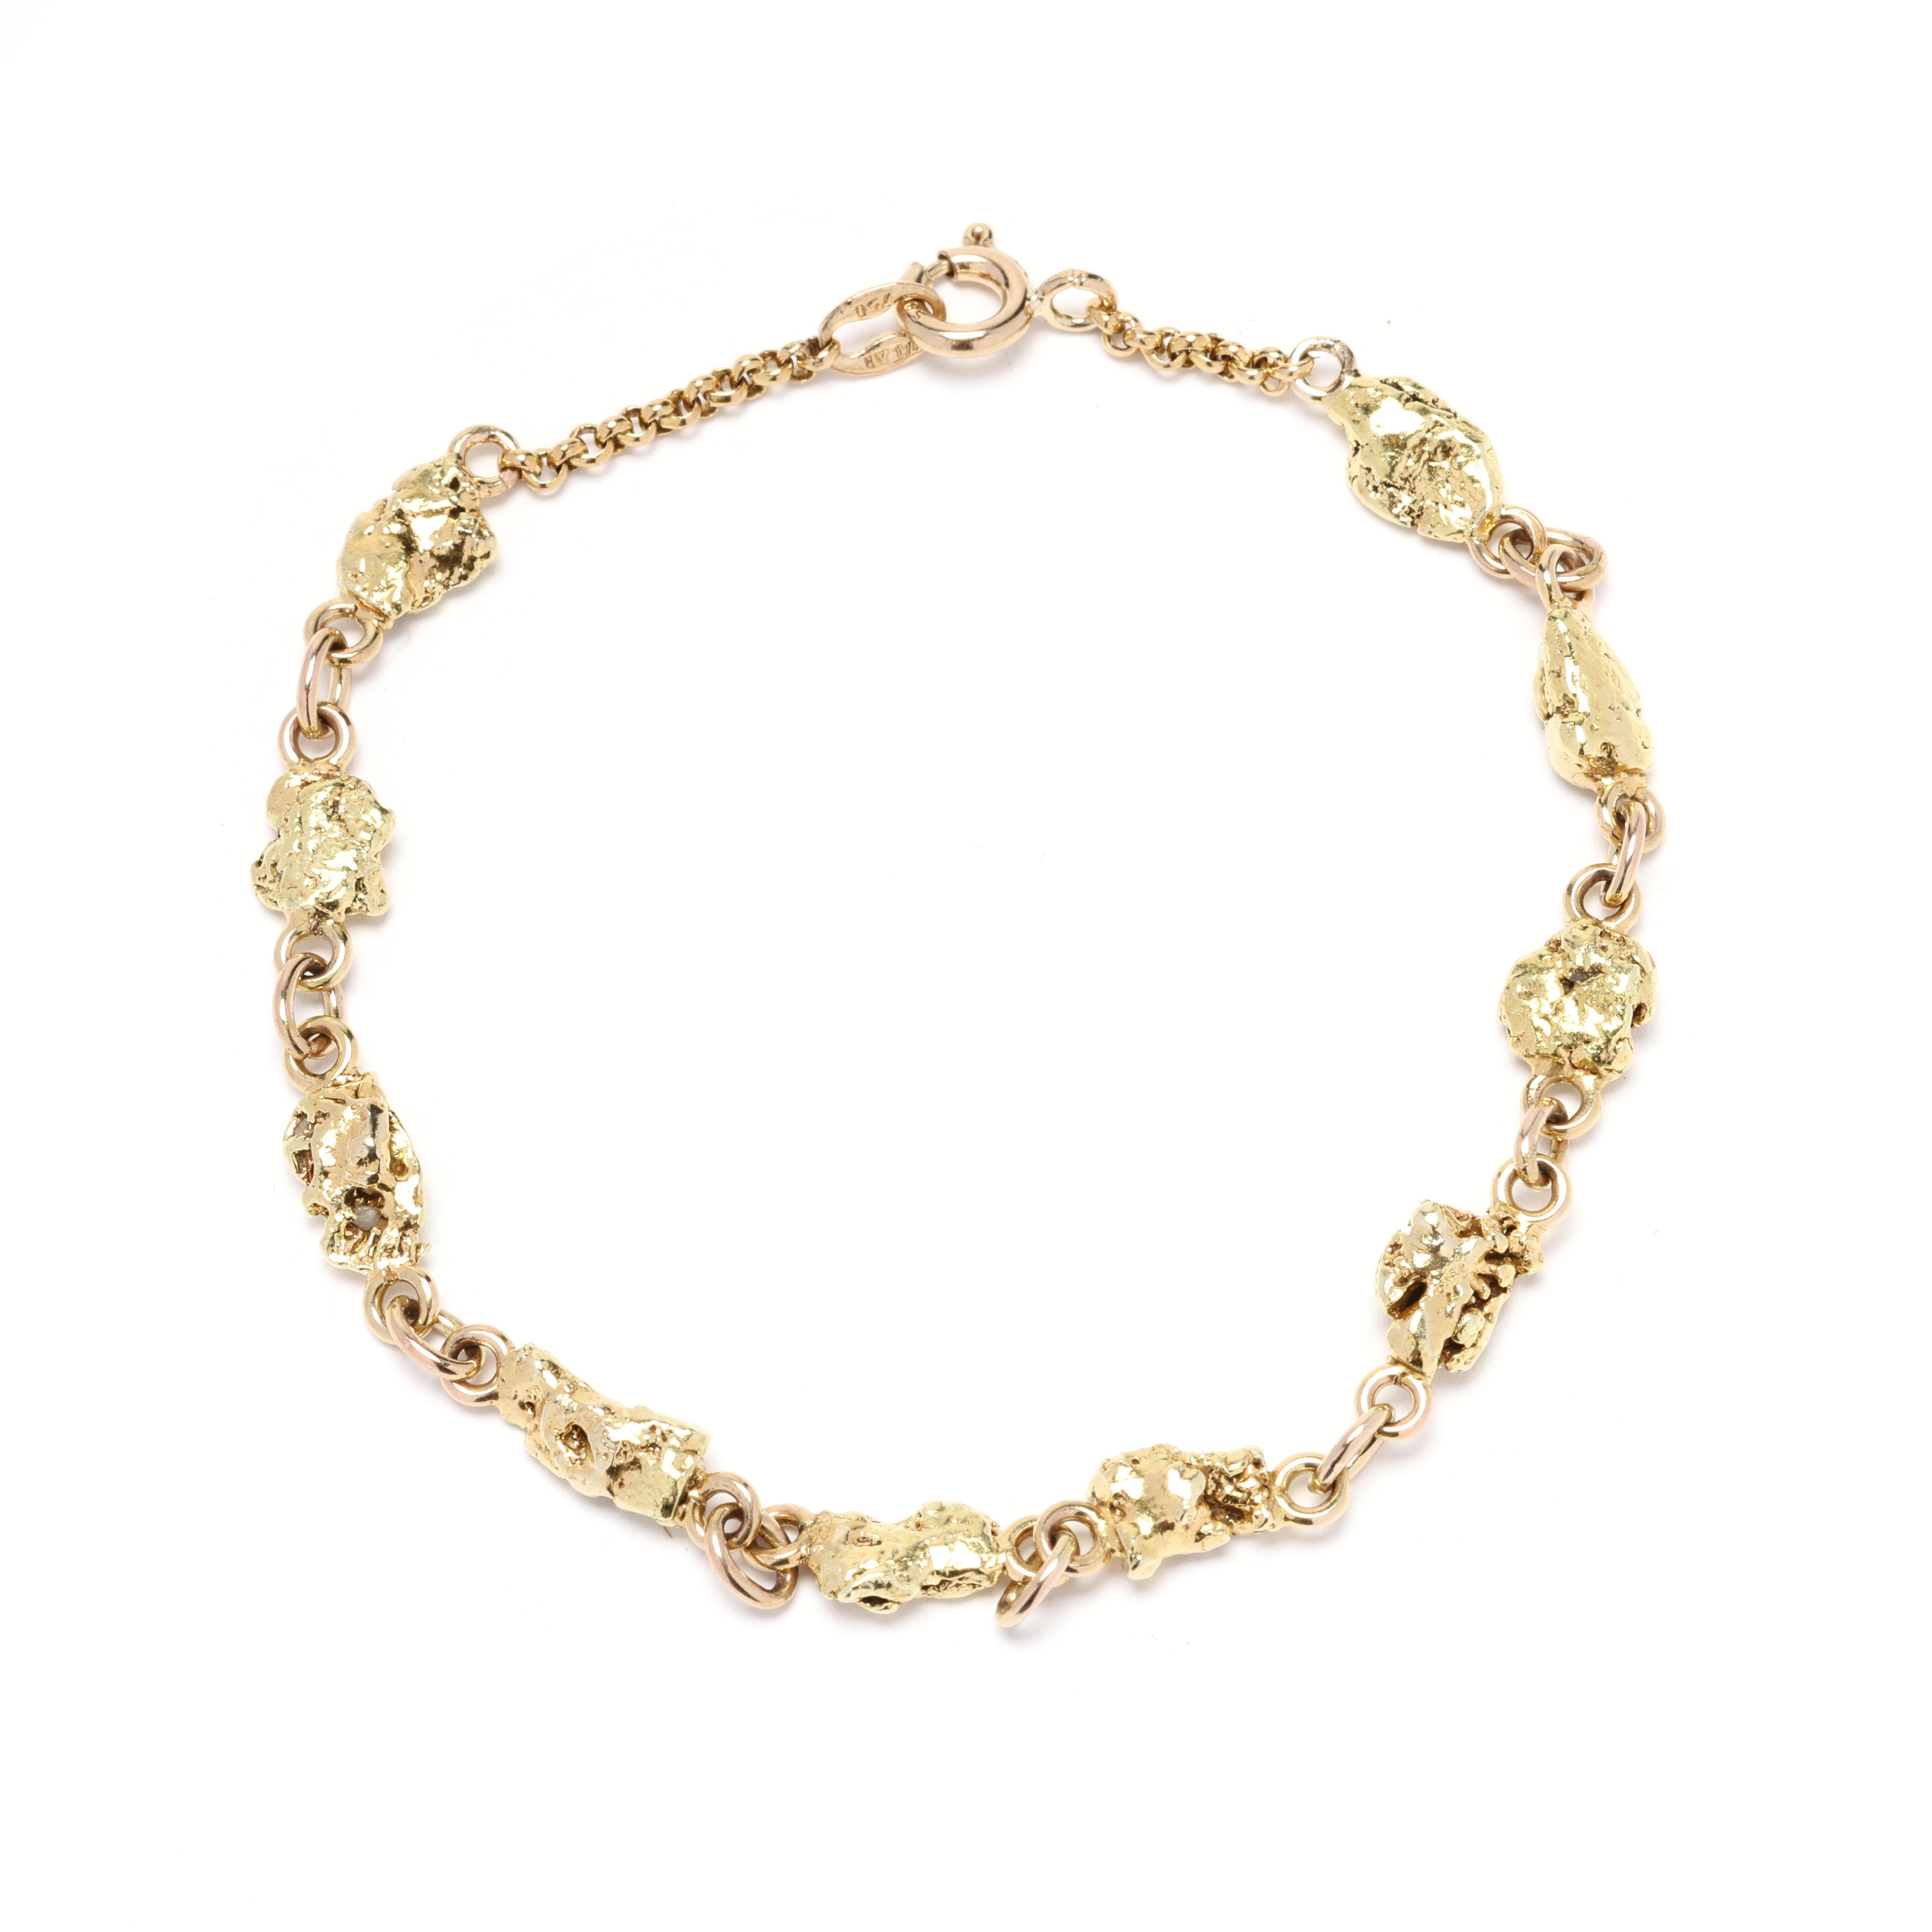 14k Gold Nugget Bracelet, 18k Yellow Gold Chain, Length 7.13 Inches, Stackable For Sale